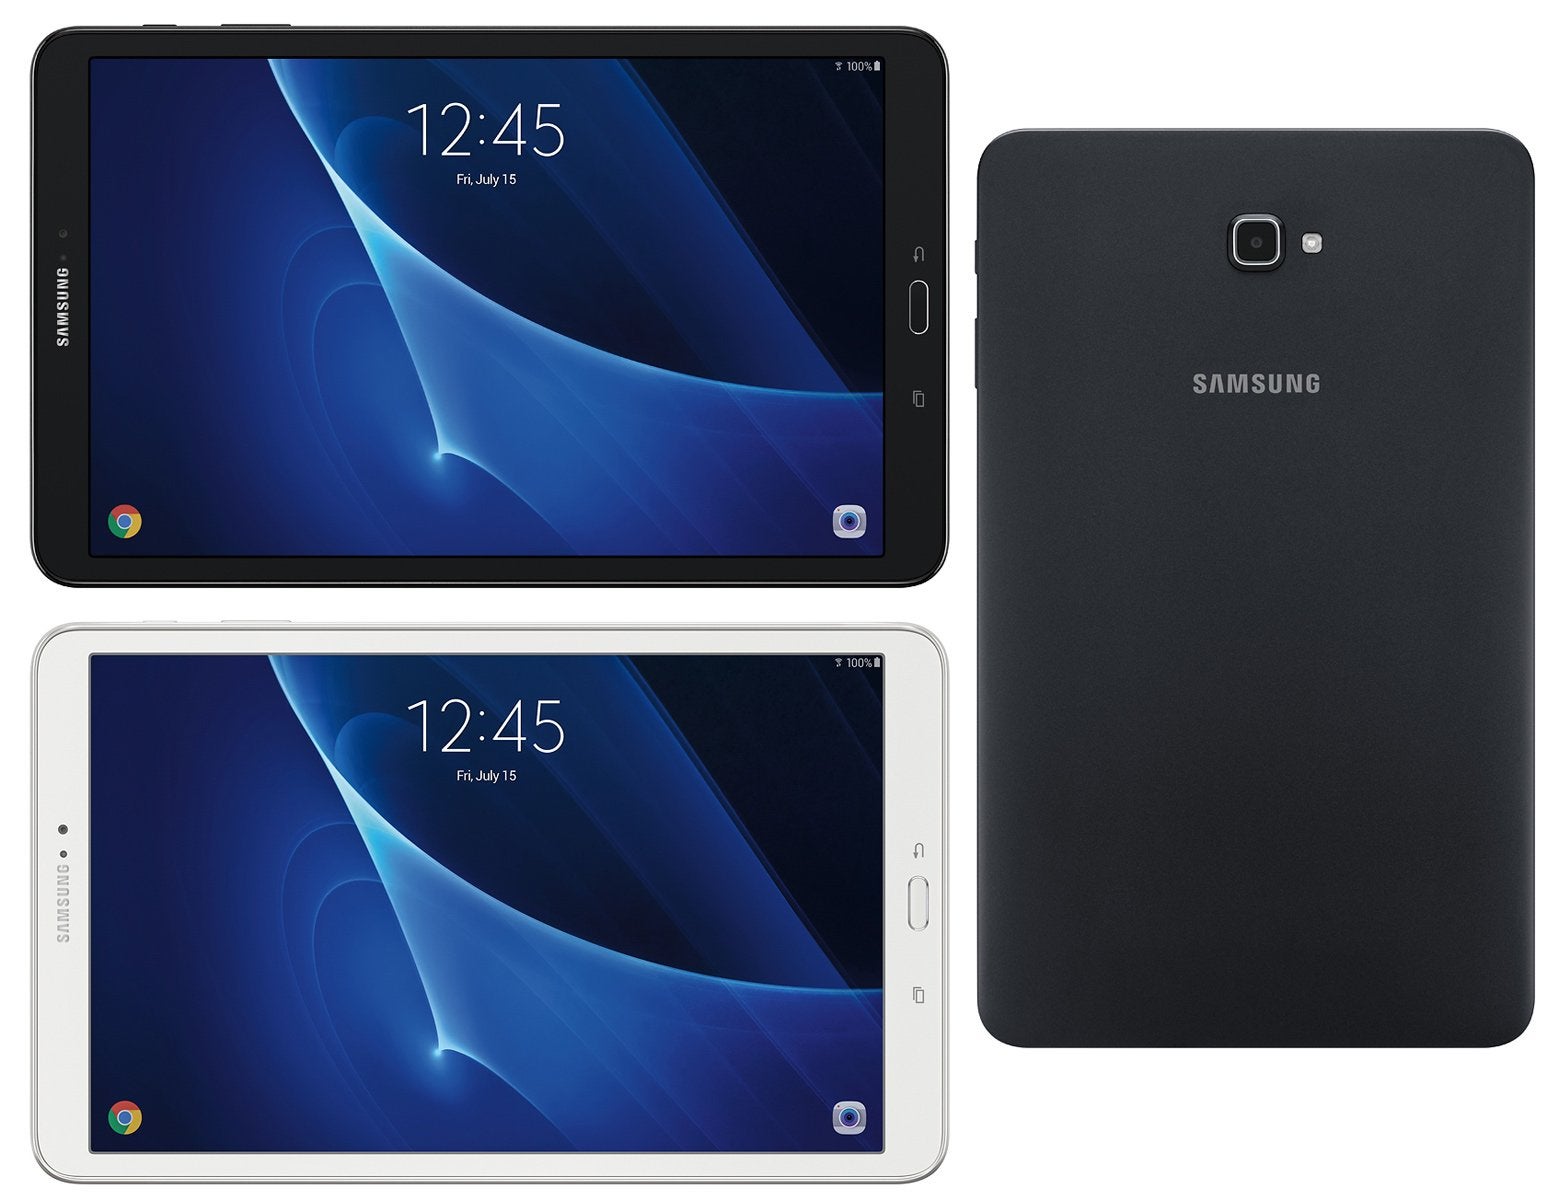 Samsung Galaxy Tab S3 8.0 press photos leaked ahead of official announcement